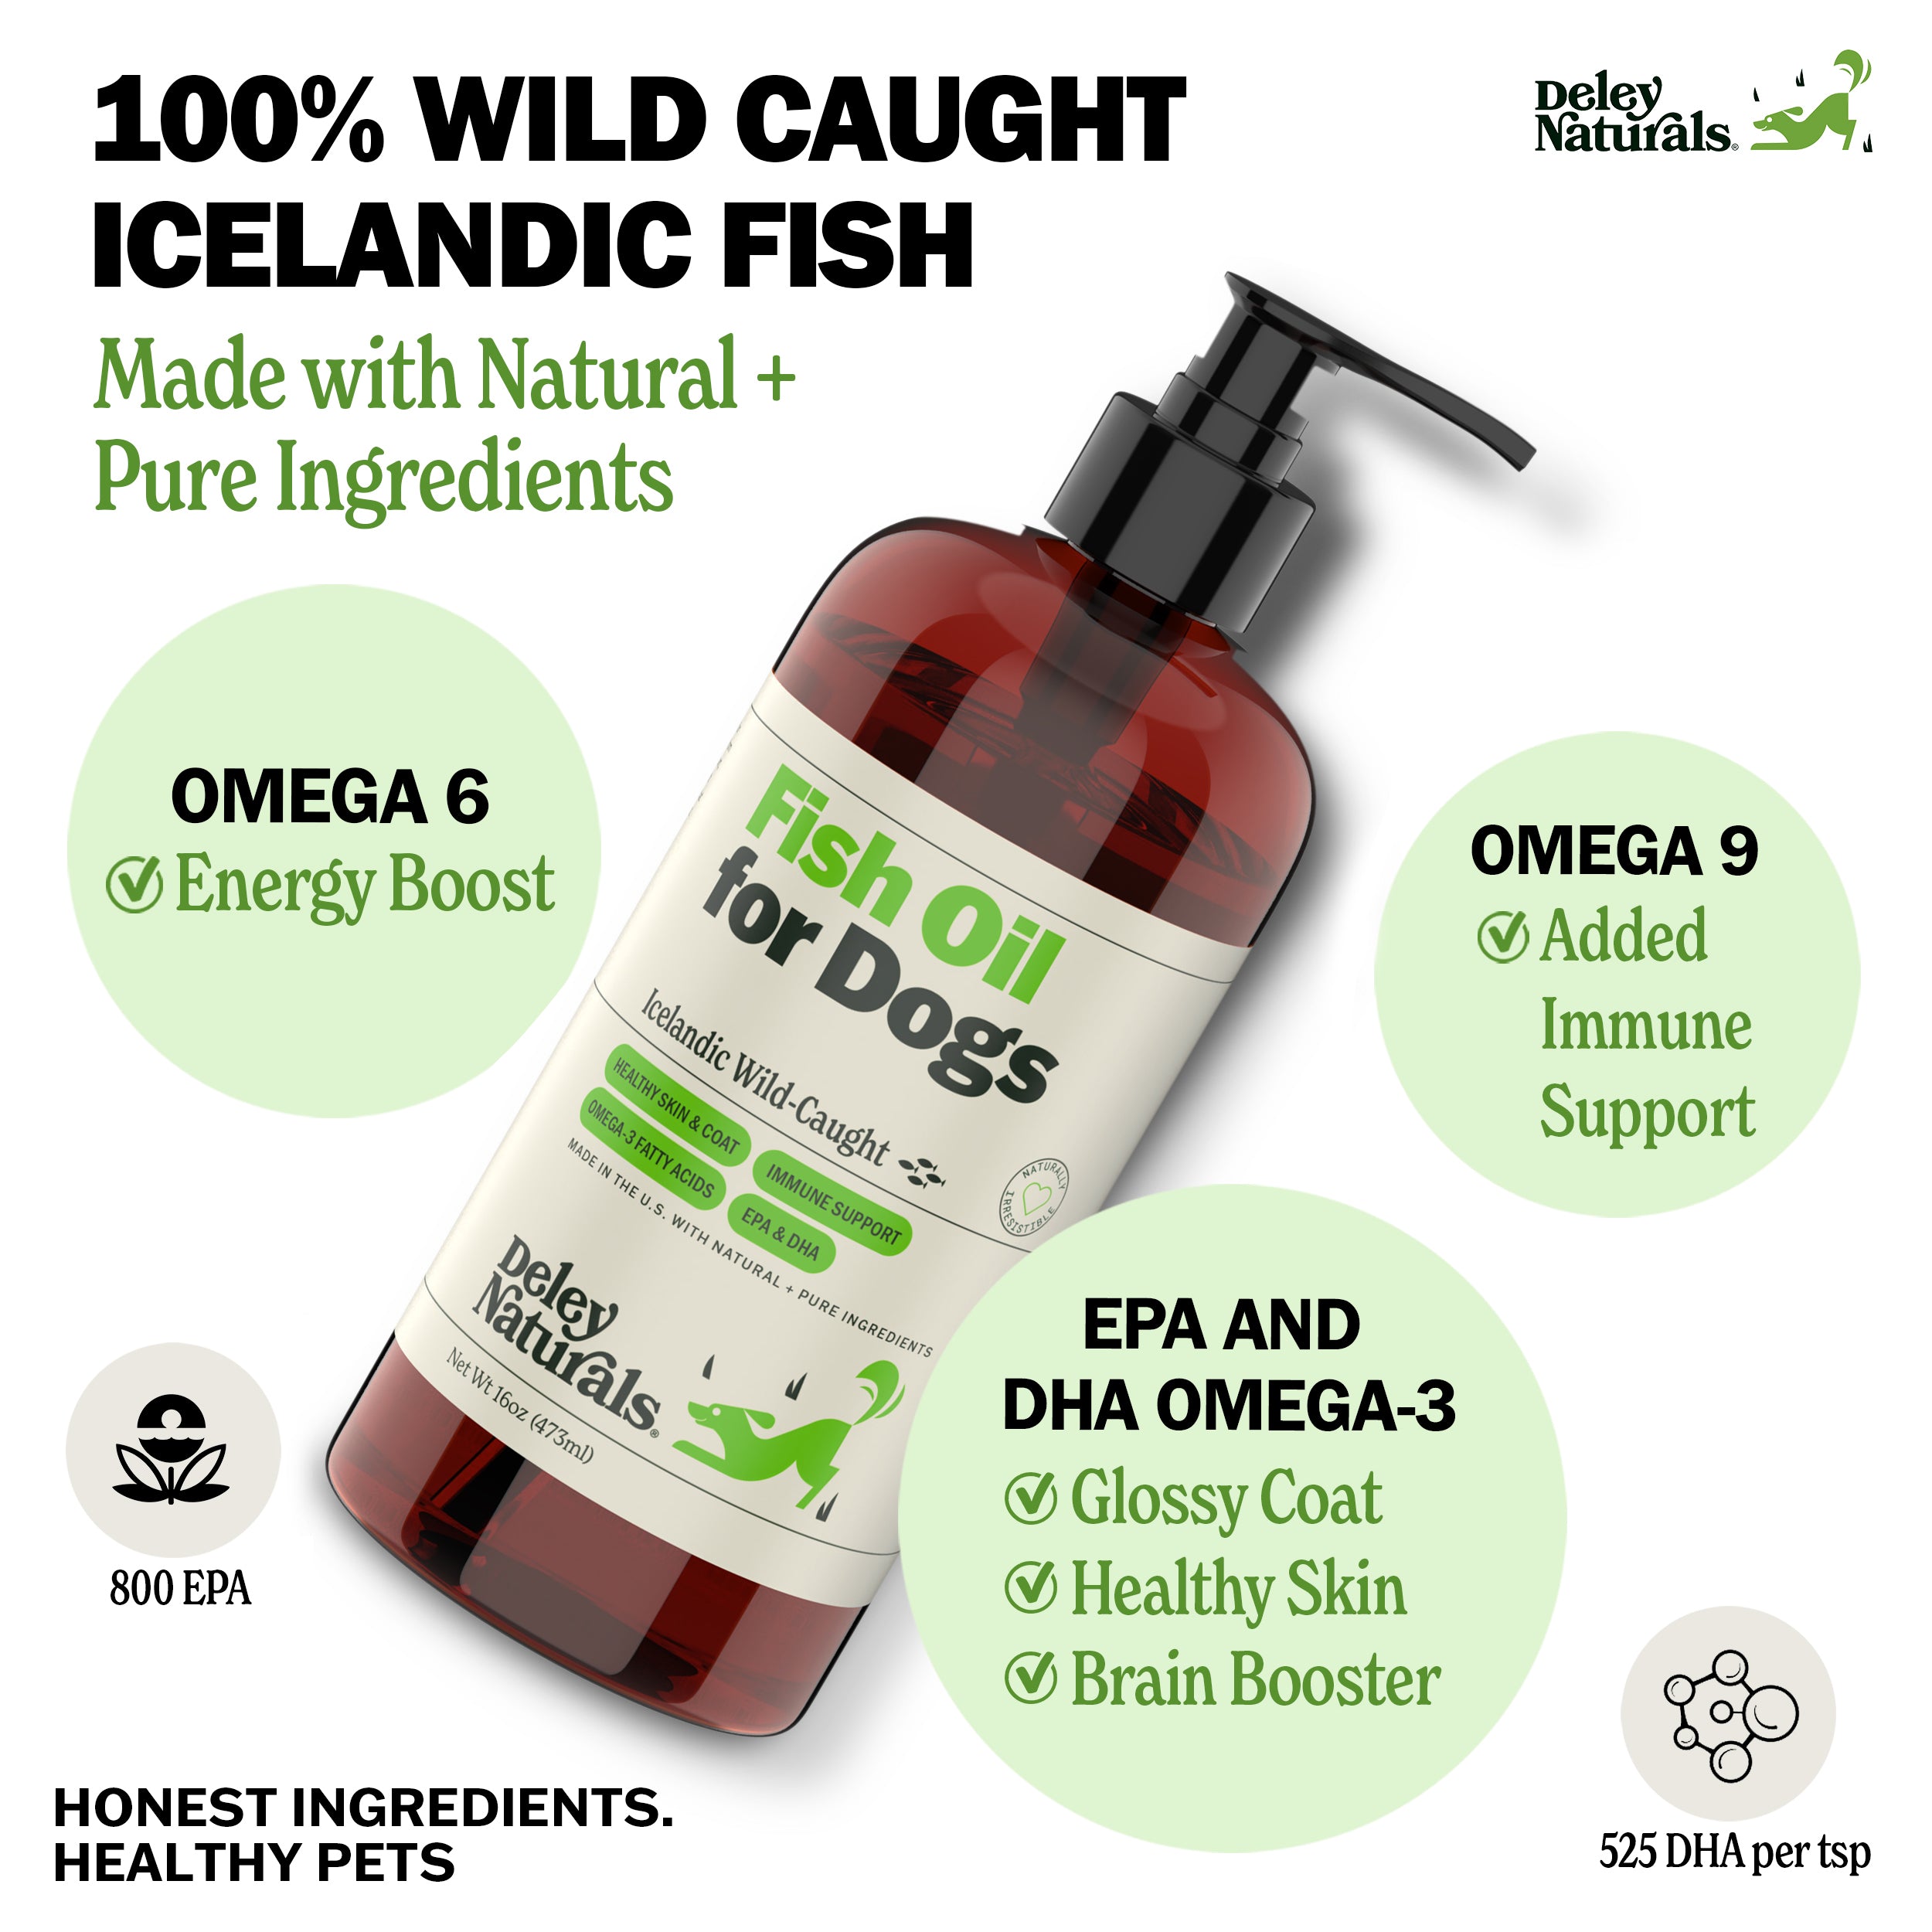 Icelandic Wild-Caught Omega 3 Fish Oil for Dogs - 16  oz Pump